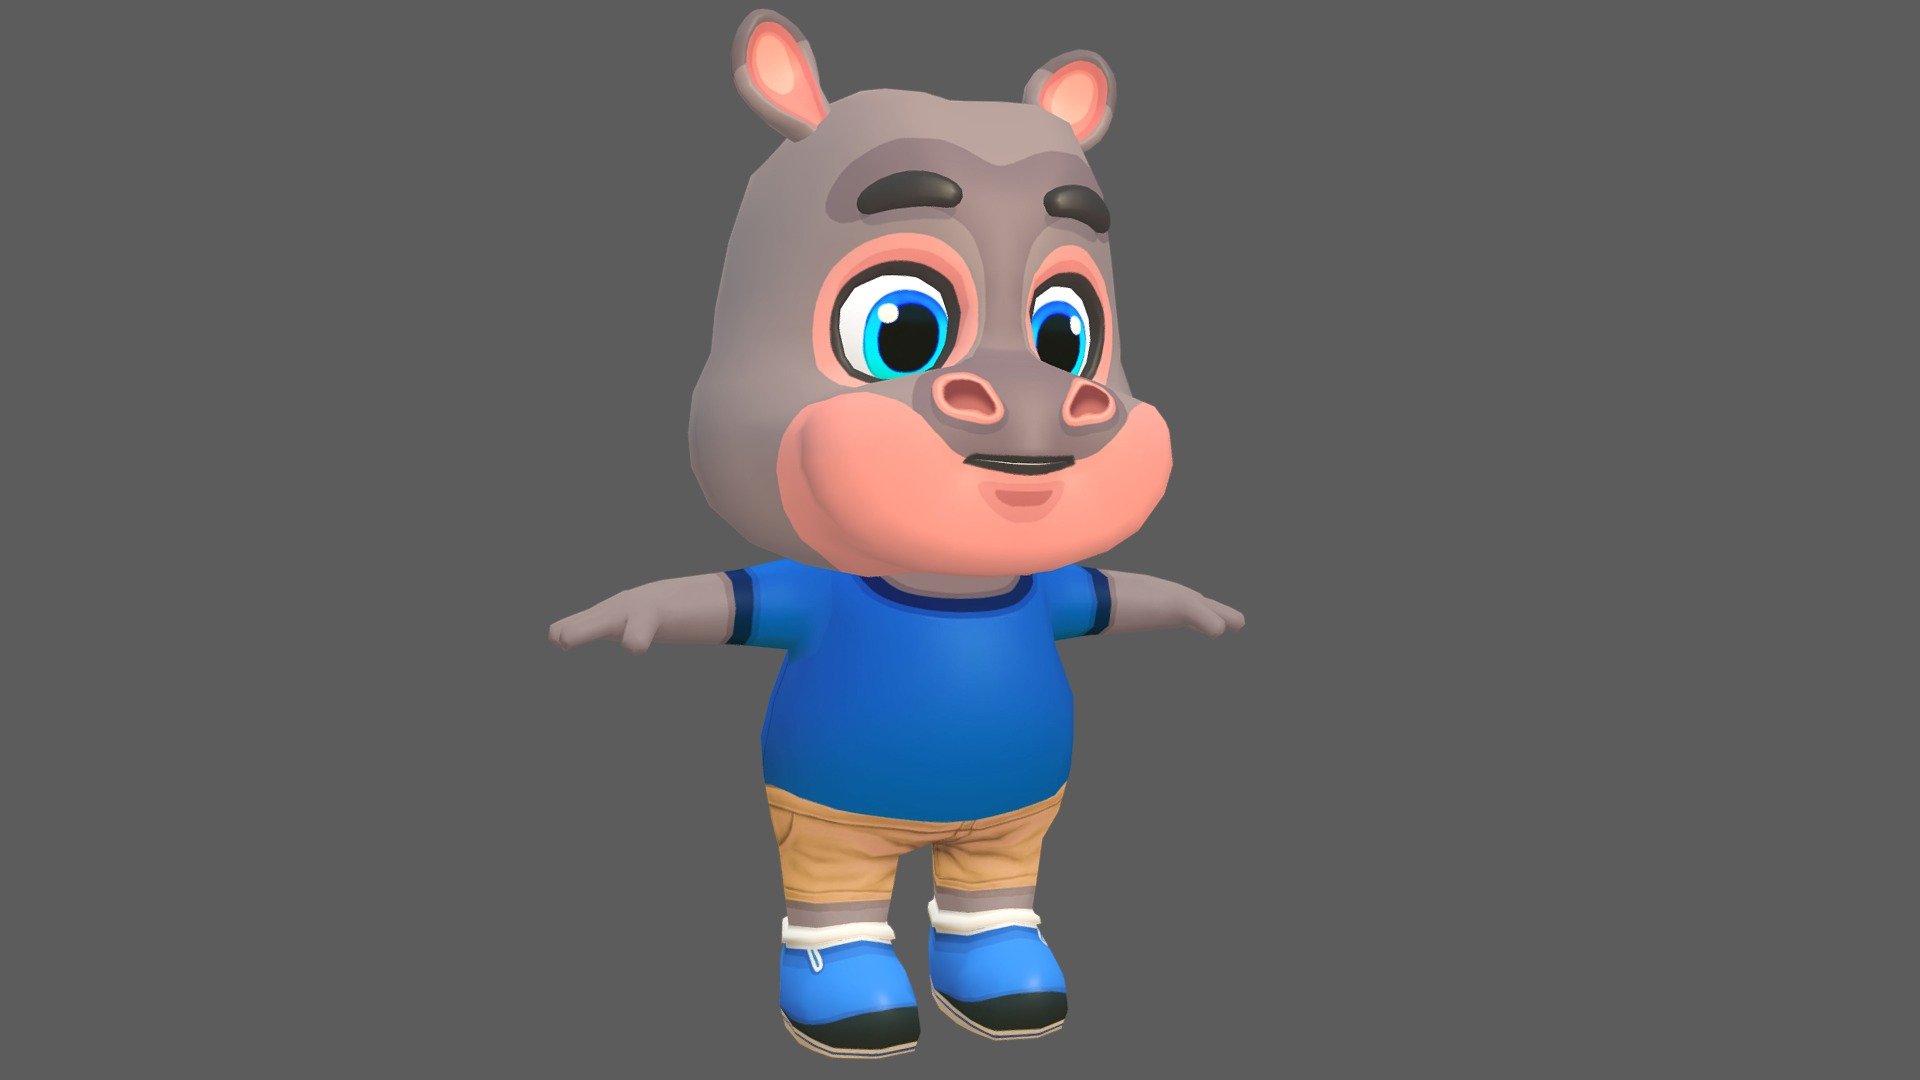 Hippo character for games and animations. The model is game ready and compatible with game engines.

Included Files:




Maya (Source files, Rig) for Unity and Unreal (.ma, .mb) - 2015 - 2020

FBX for Unity - 2014 - 2020

FBX for Unreal - 2014 - 2020

OBJ

Unity Project - Preconfigured Humanoid Rig

Supports Humanoid Animation:




Preconfigured Humanoid Rig &amp; Animation Clips

Unity Humanoid compatible FBX

Mixamo

Low poly model with four texture resolutions 4096x4096, 2048x2048, 1024x1024 &amp; 512x512.

The package includes 20 Animations:




Walk

Run

Idle

Jump

Leap left

Leap right

Death

Skidding

Roll

Crash

Power up

Whirl

Whirl jump

Waving in air

Backwards run

Dizzy

Gum Bubble

Gliding

Waving

Looking behind

The model is fully rigged and can be easily animated or modified if required.

The model is game ready at:




3646 Polys

3643 Verts

UV mapped with non-overlapping UV's. The shadows and lights are baked in the texture 3d model